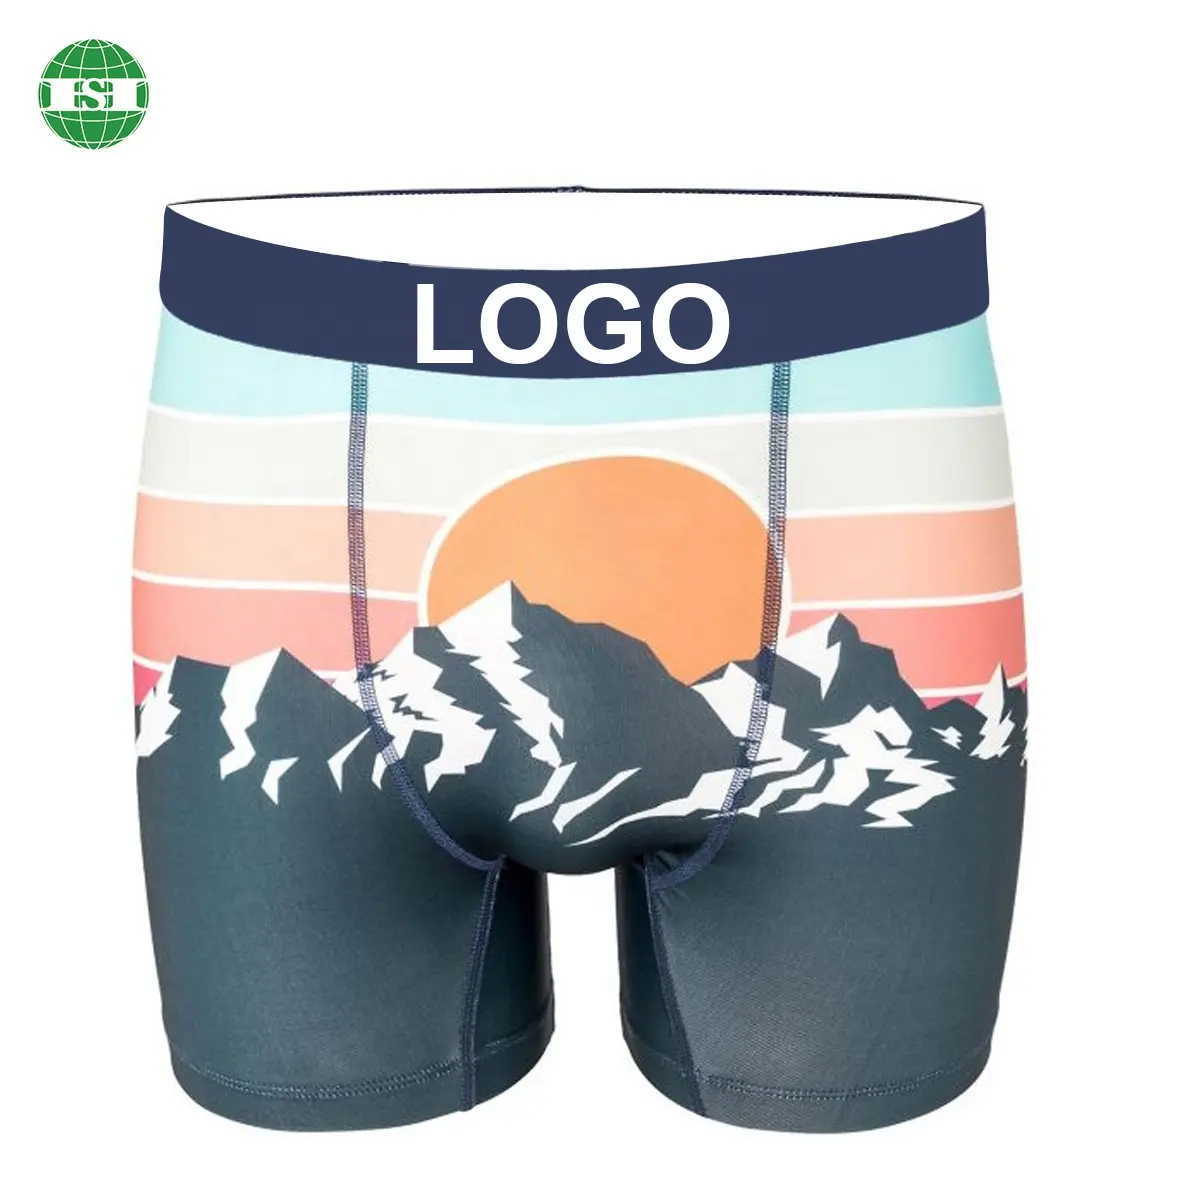 Customized patterned male underwear over all print boxer shorts OEM with your brand name around waistband